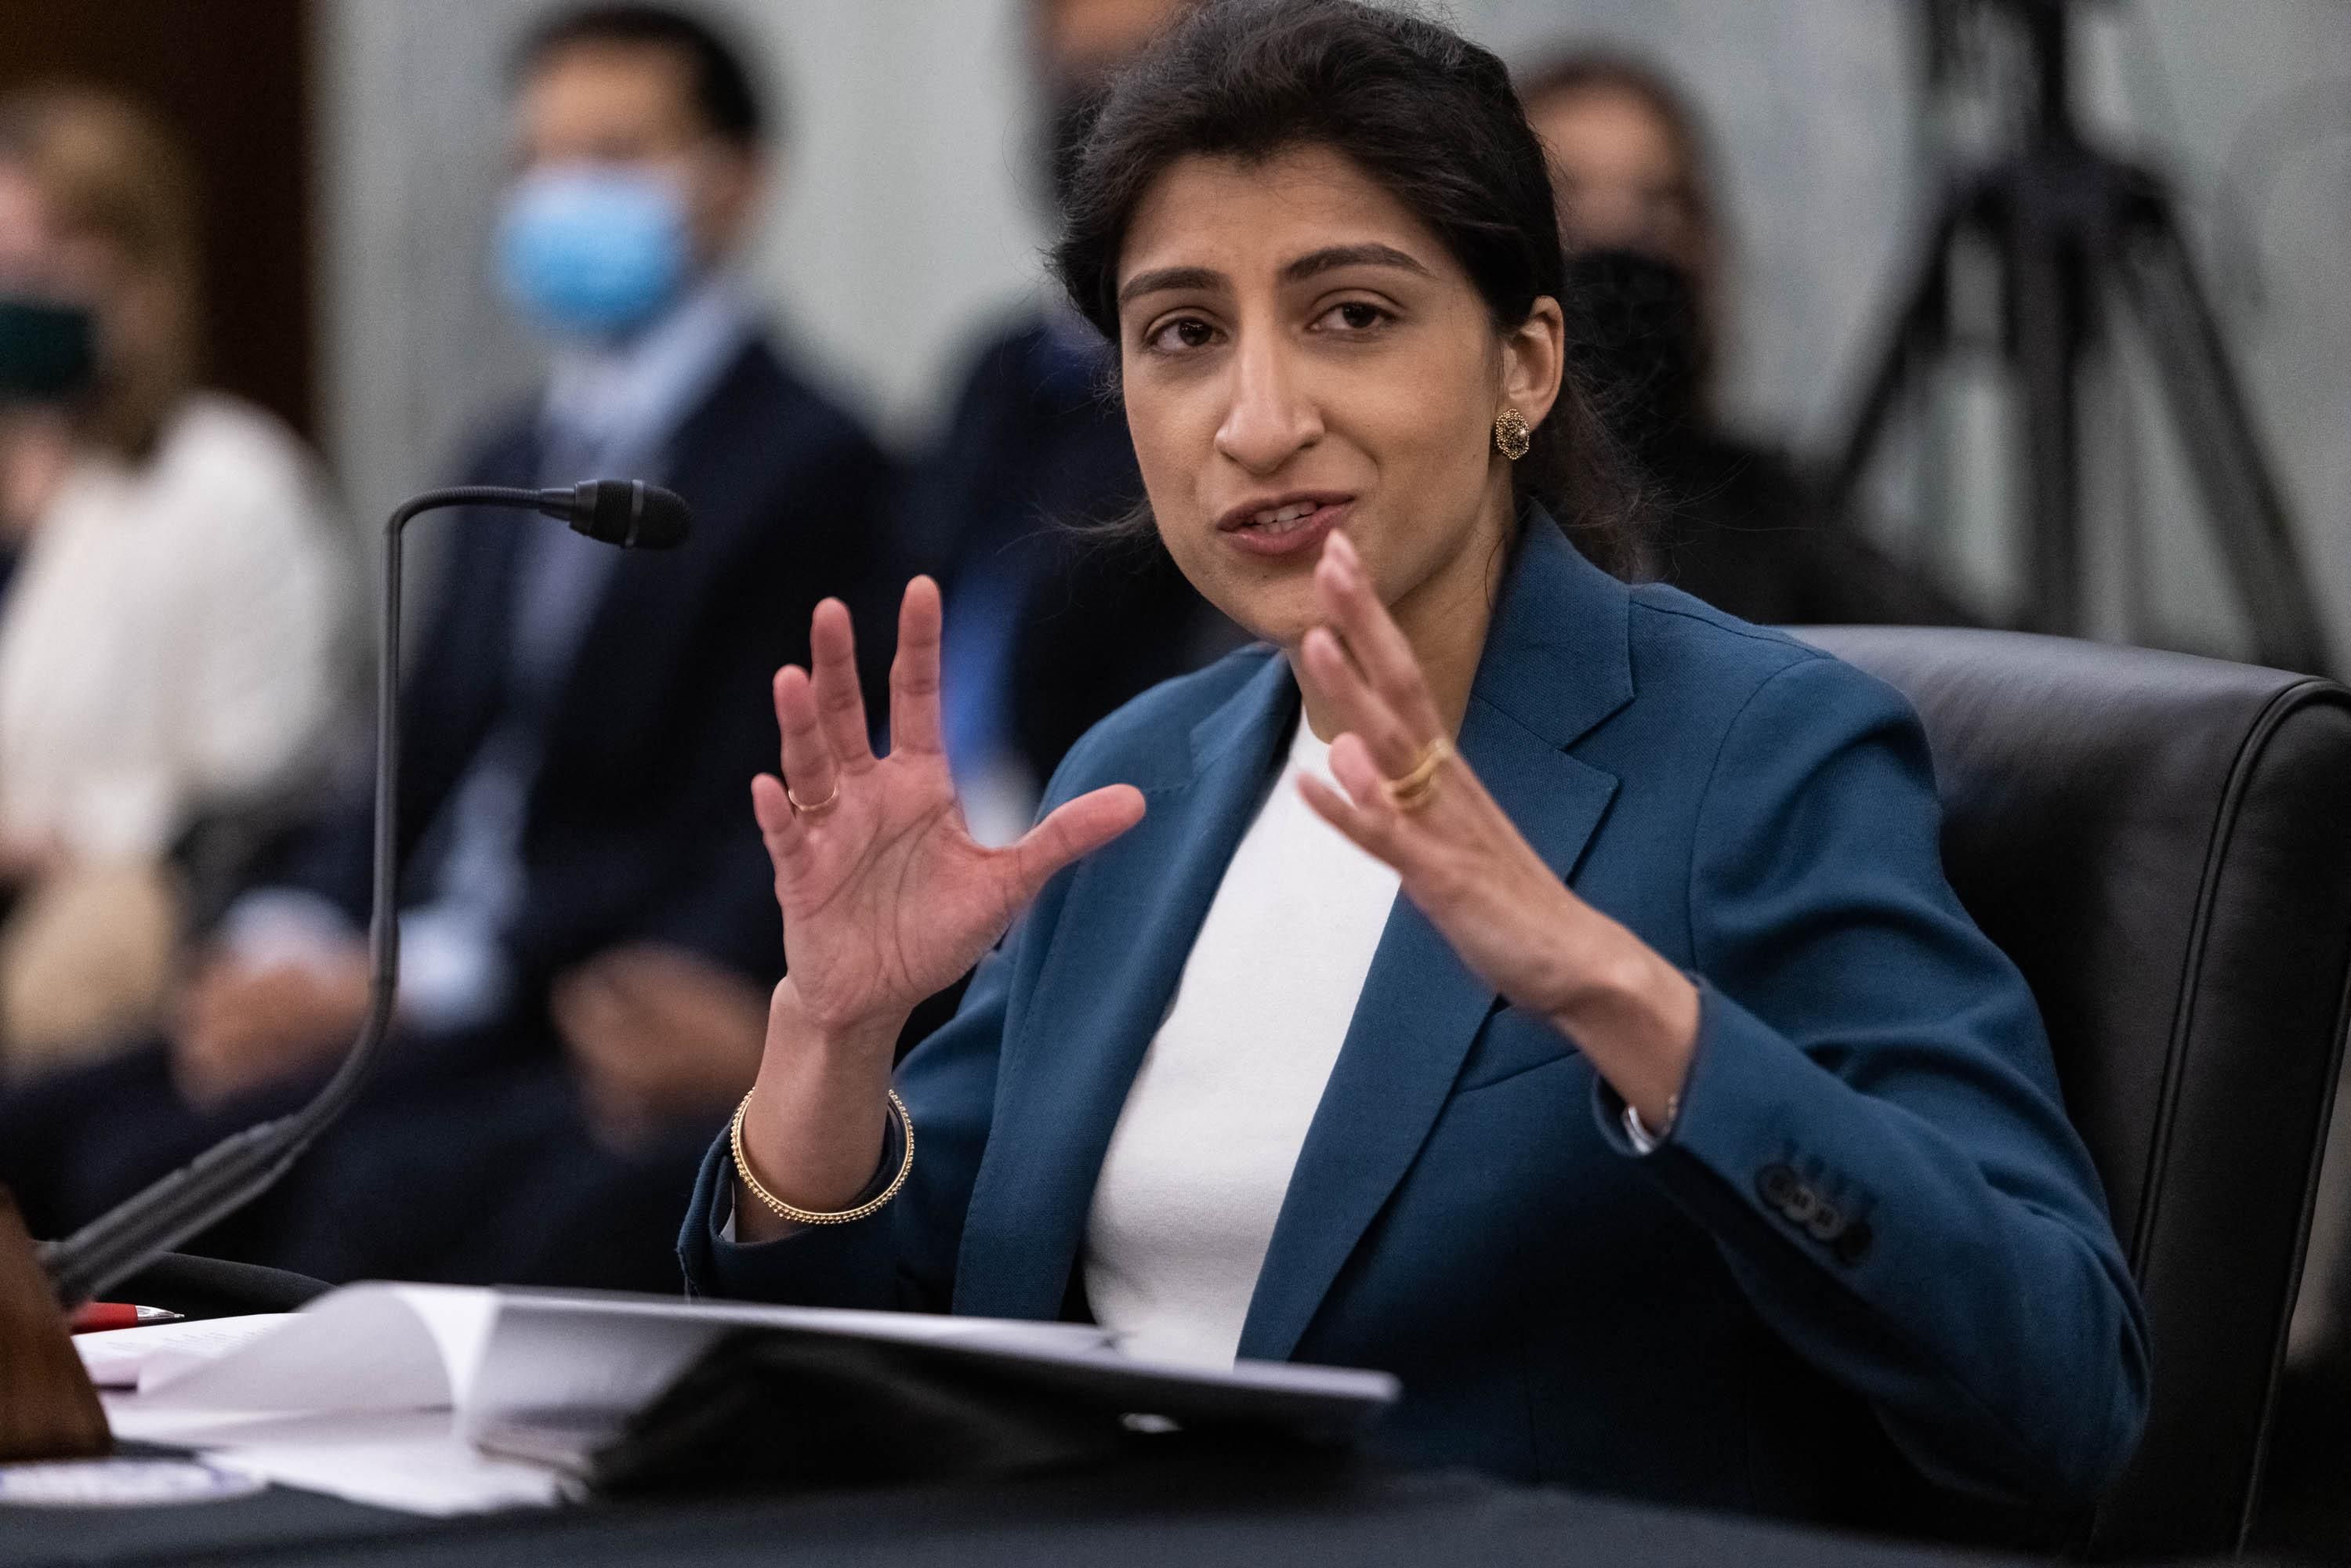 Federal Trade Commission Chair Lina Khan testifies during a Senate Committee on Commerce, Science, and Transportation hearing on Capitol Hill in Washington, D.C. April 21, 2021. (Photo: Graeme Jennings/Pool/AFP via Getty Images)